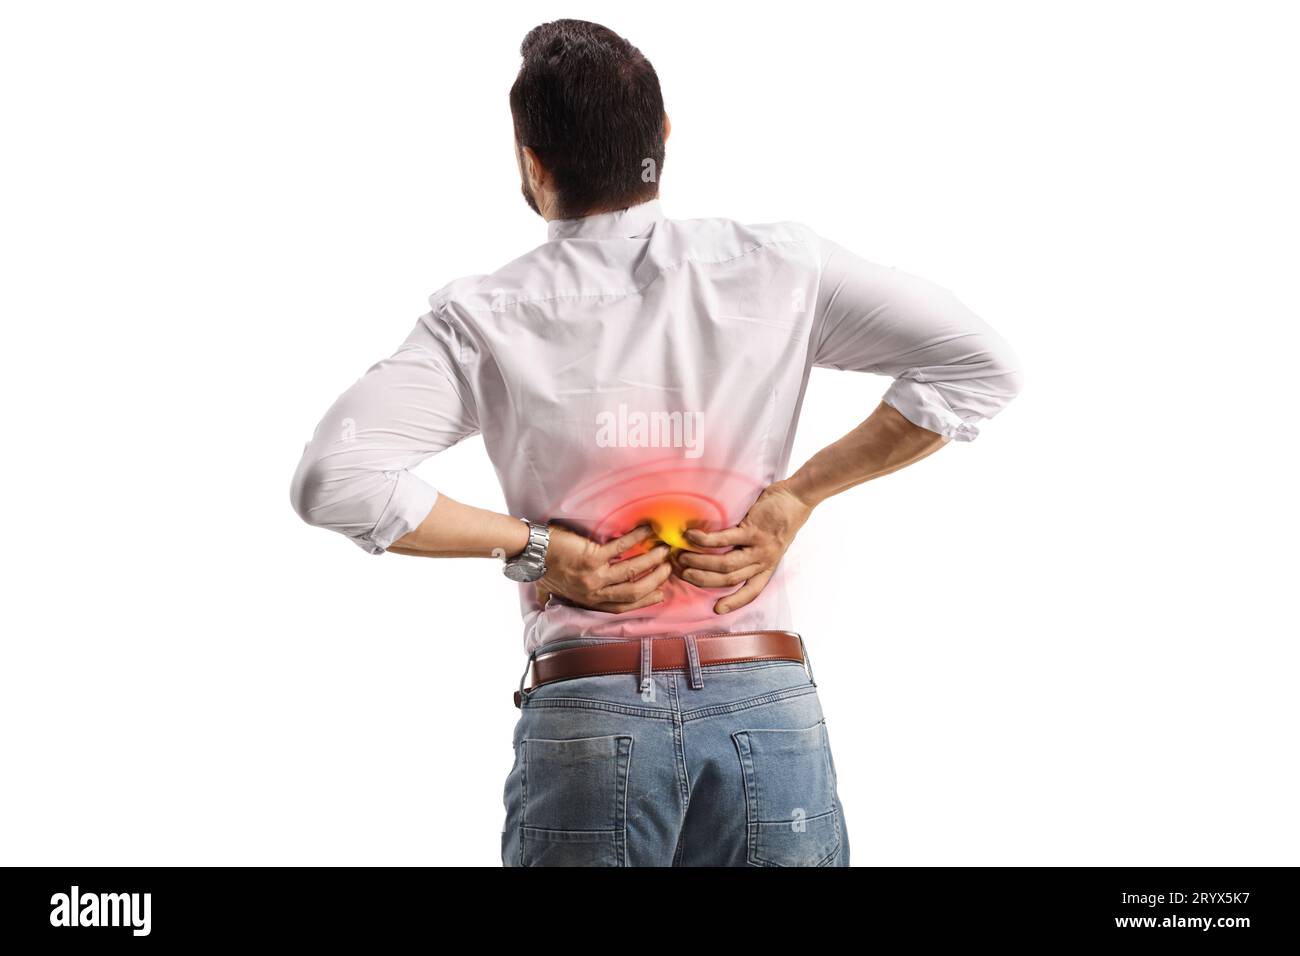 Rear view shot of a man holding lower back inflamed zone isolated on white background Stock Photo